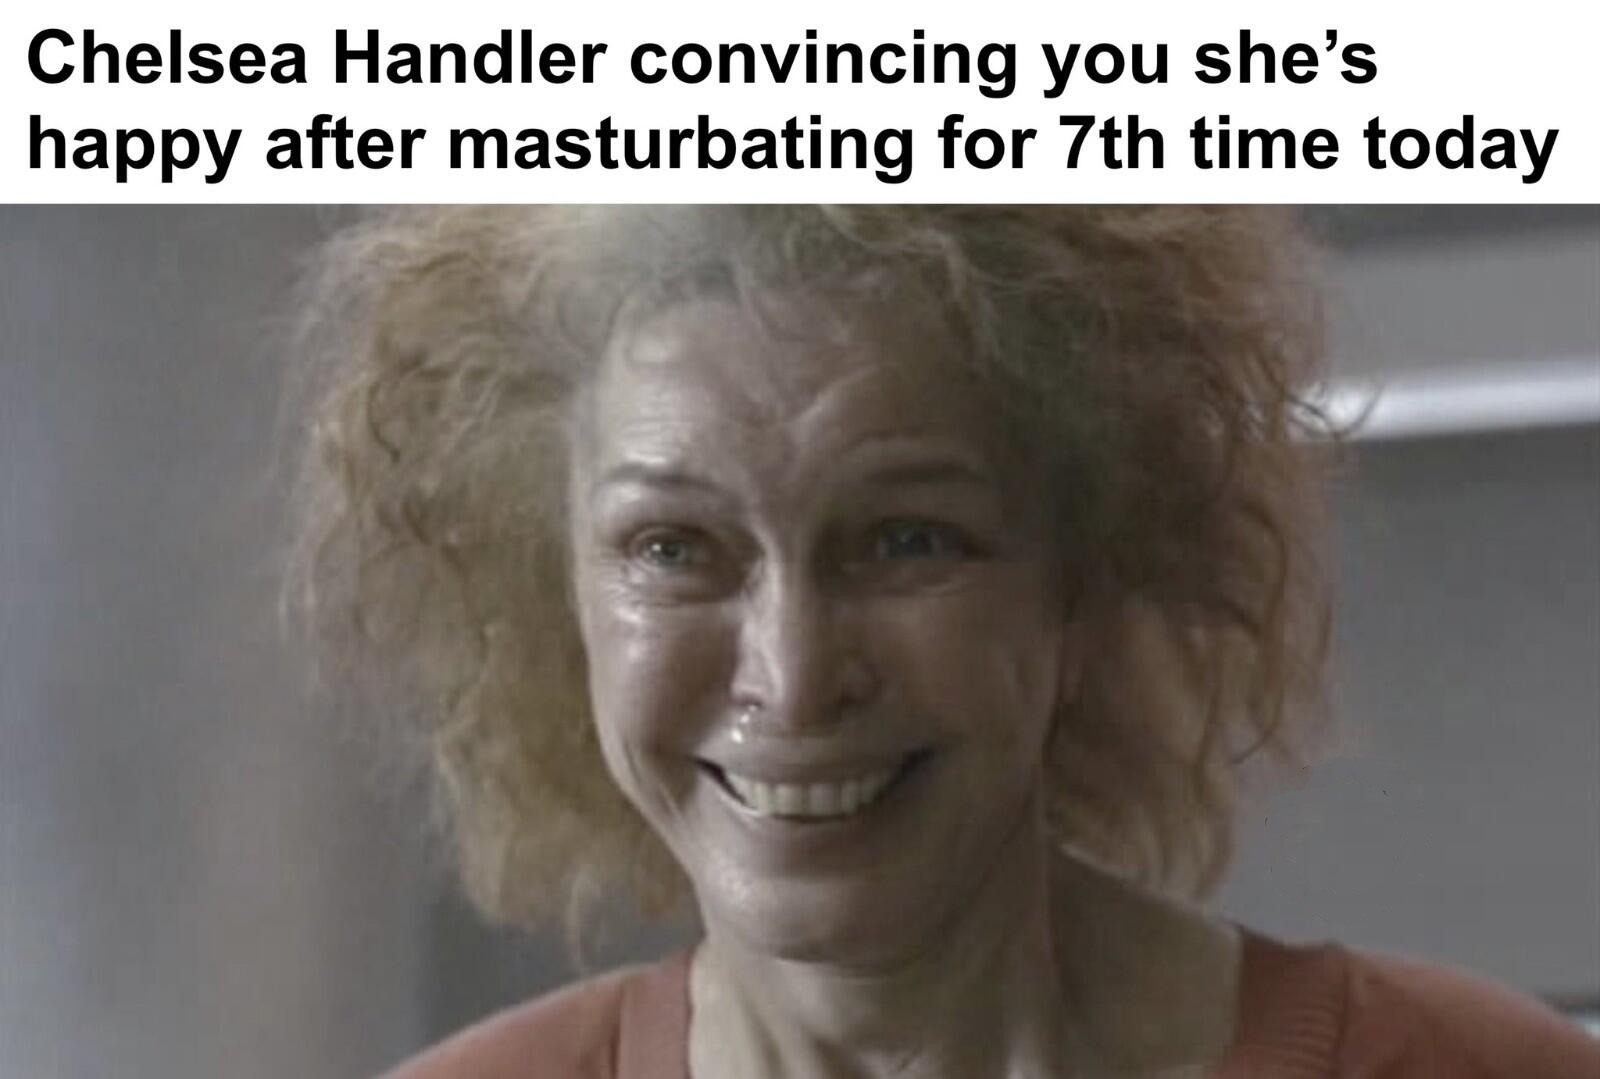 Chelsea Handler Makes 'Comedy' Skit About the Life of a Childless Woman but It Reeks of Sadness | image tagged in chelsea handler,comedy skit,childless,rode hard and put away wet,masturbation,triggered feminist | made w/ Imgflip meme maker